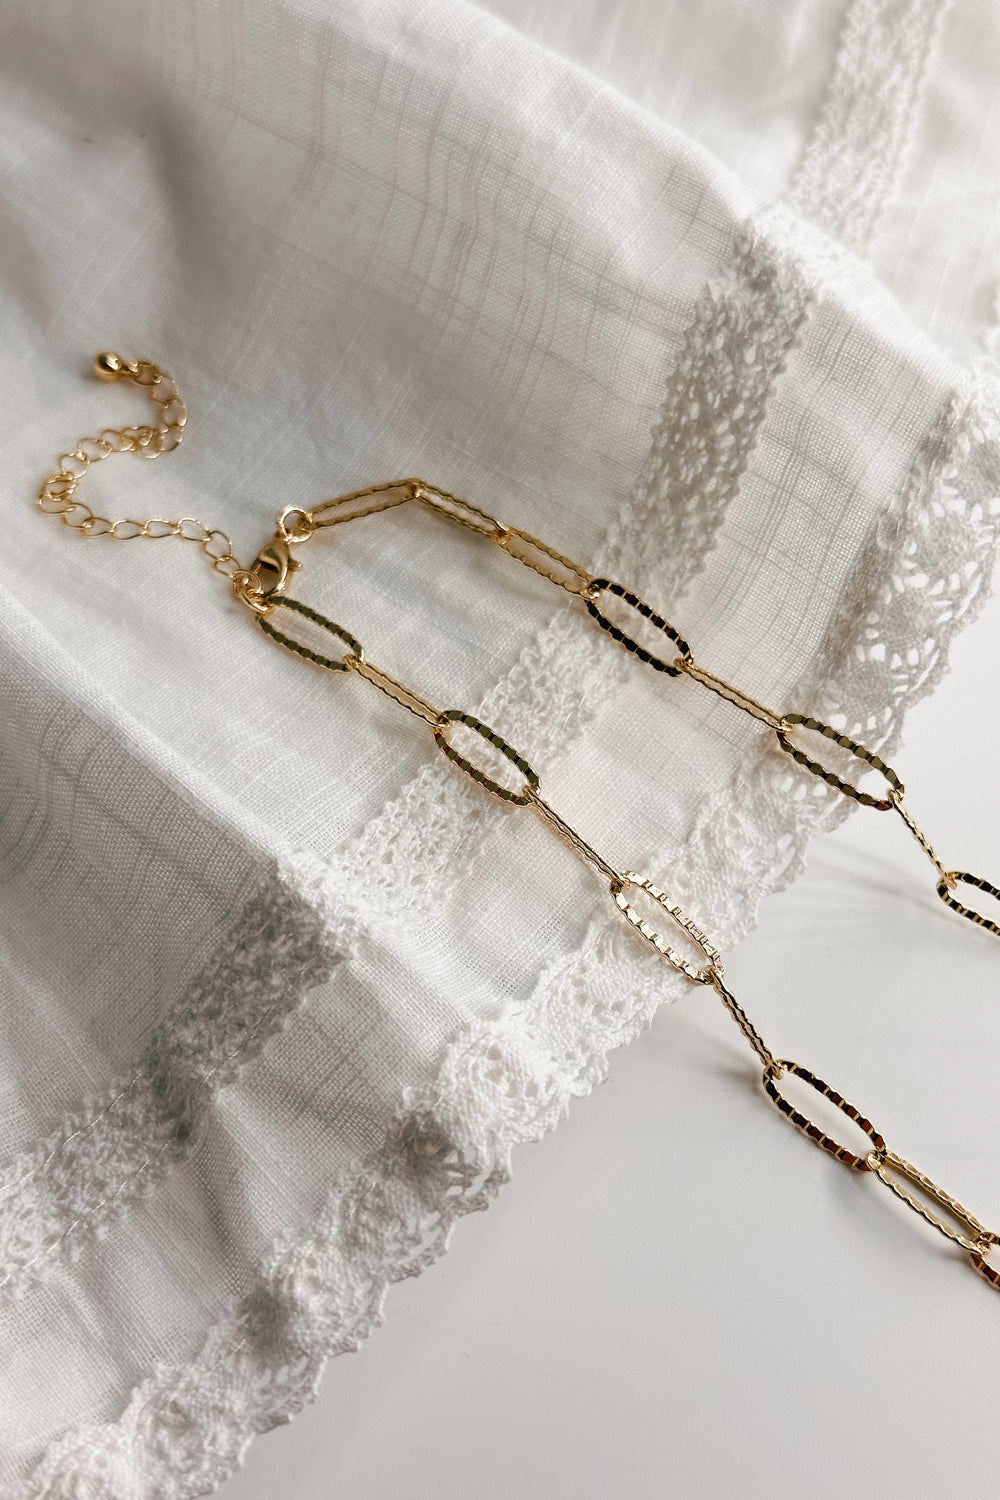 Image shows the closure of the Sadie Gold Textured Chain Link Necklace against a white background. Necklace has skinny oval gold textured chain links. Shown without charms.